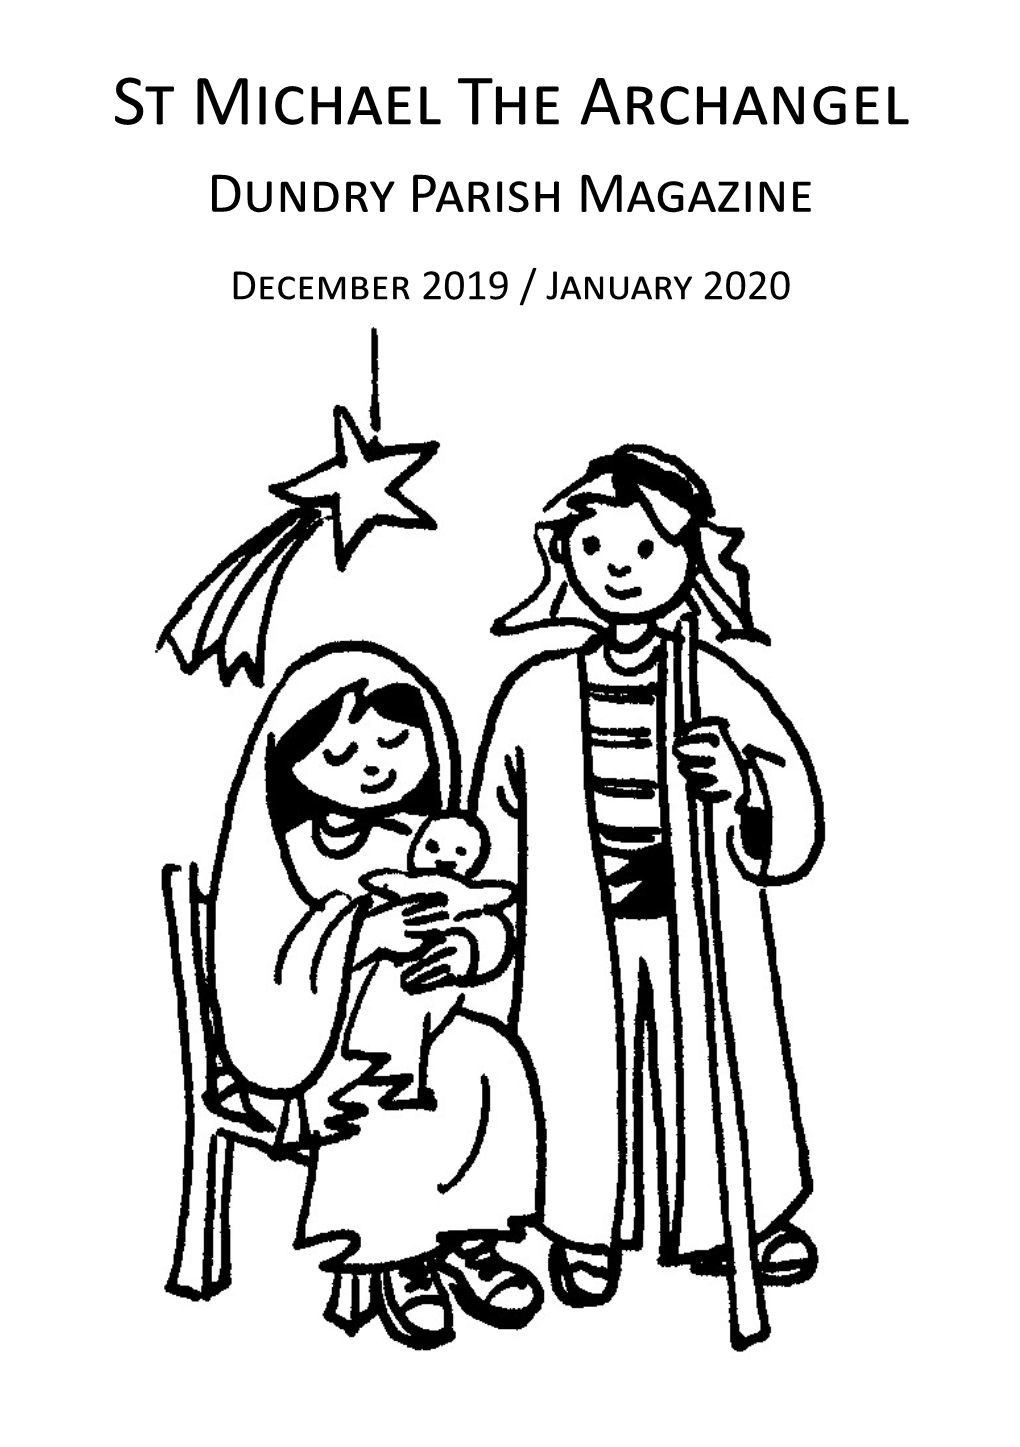 St Michael the Archangel Dundry Parish Magazine December 2019 / January 2020 CONTACT INFORMATION Rector in Vacancy